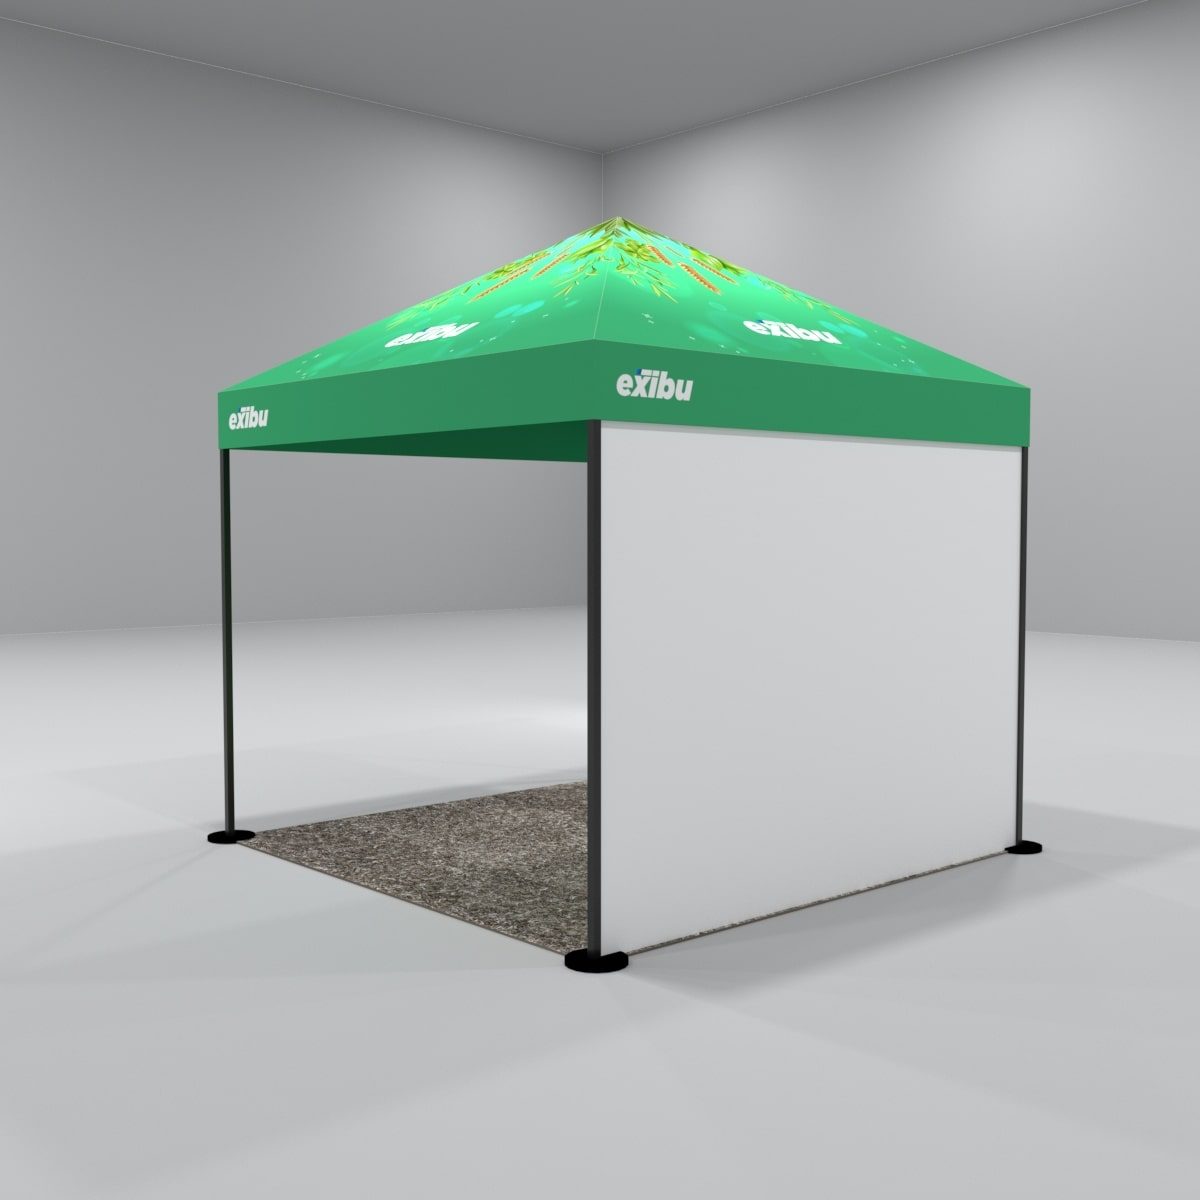 Kit 7 – 3X3 M Gazebo Tent With Full Top Printed And Backdrop